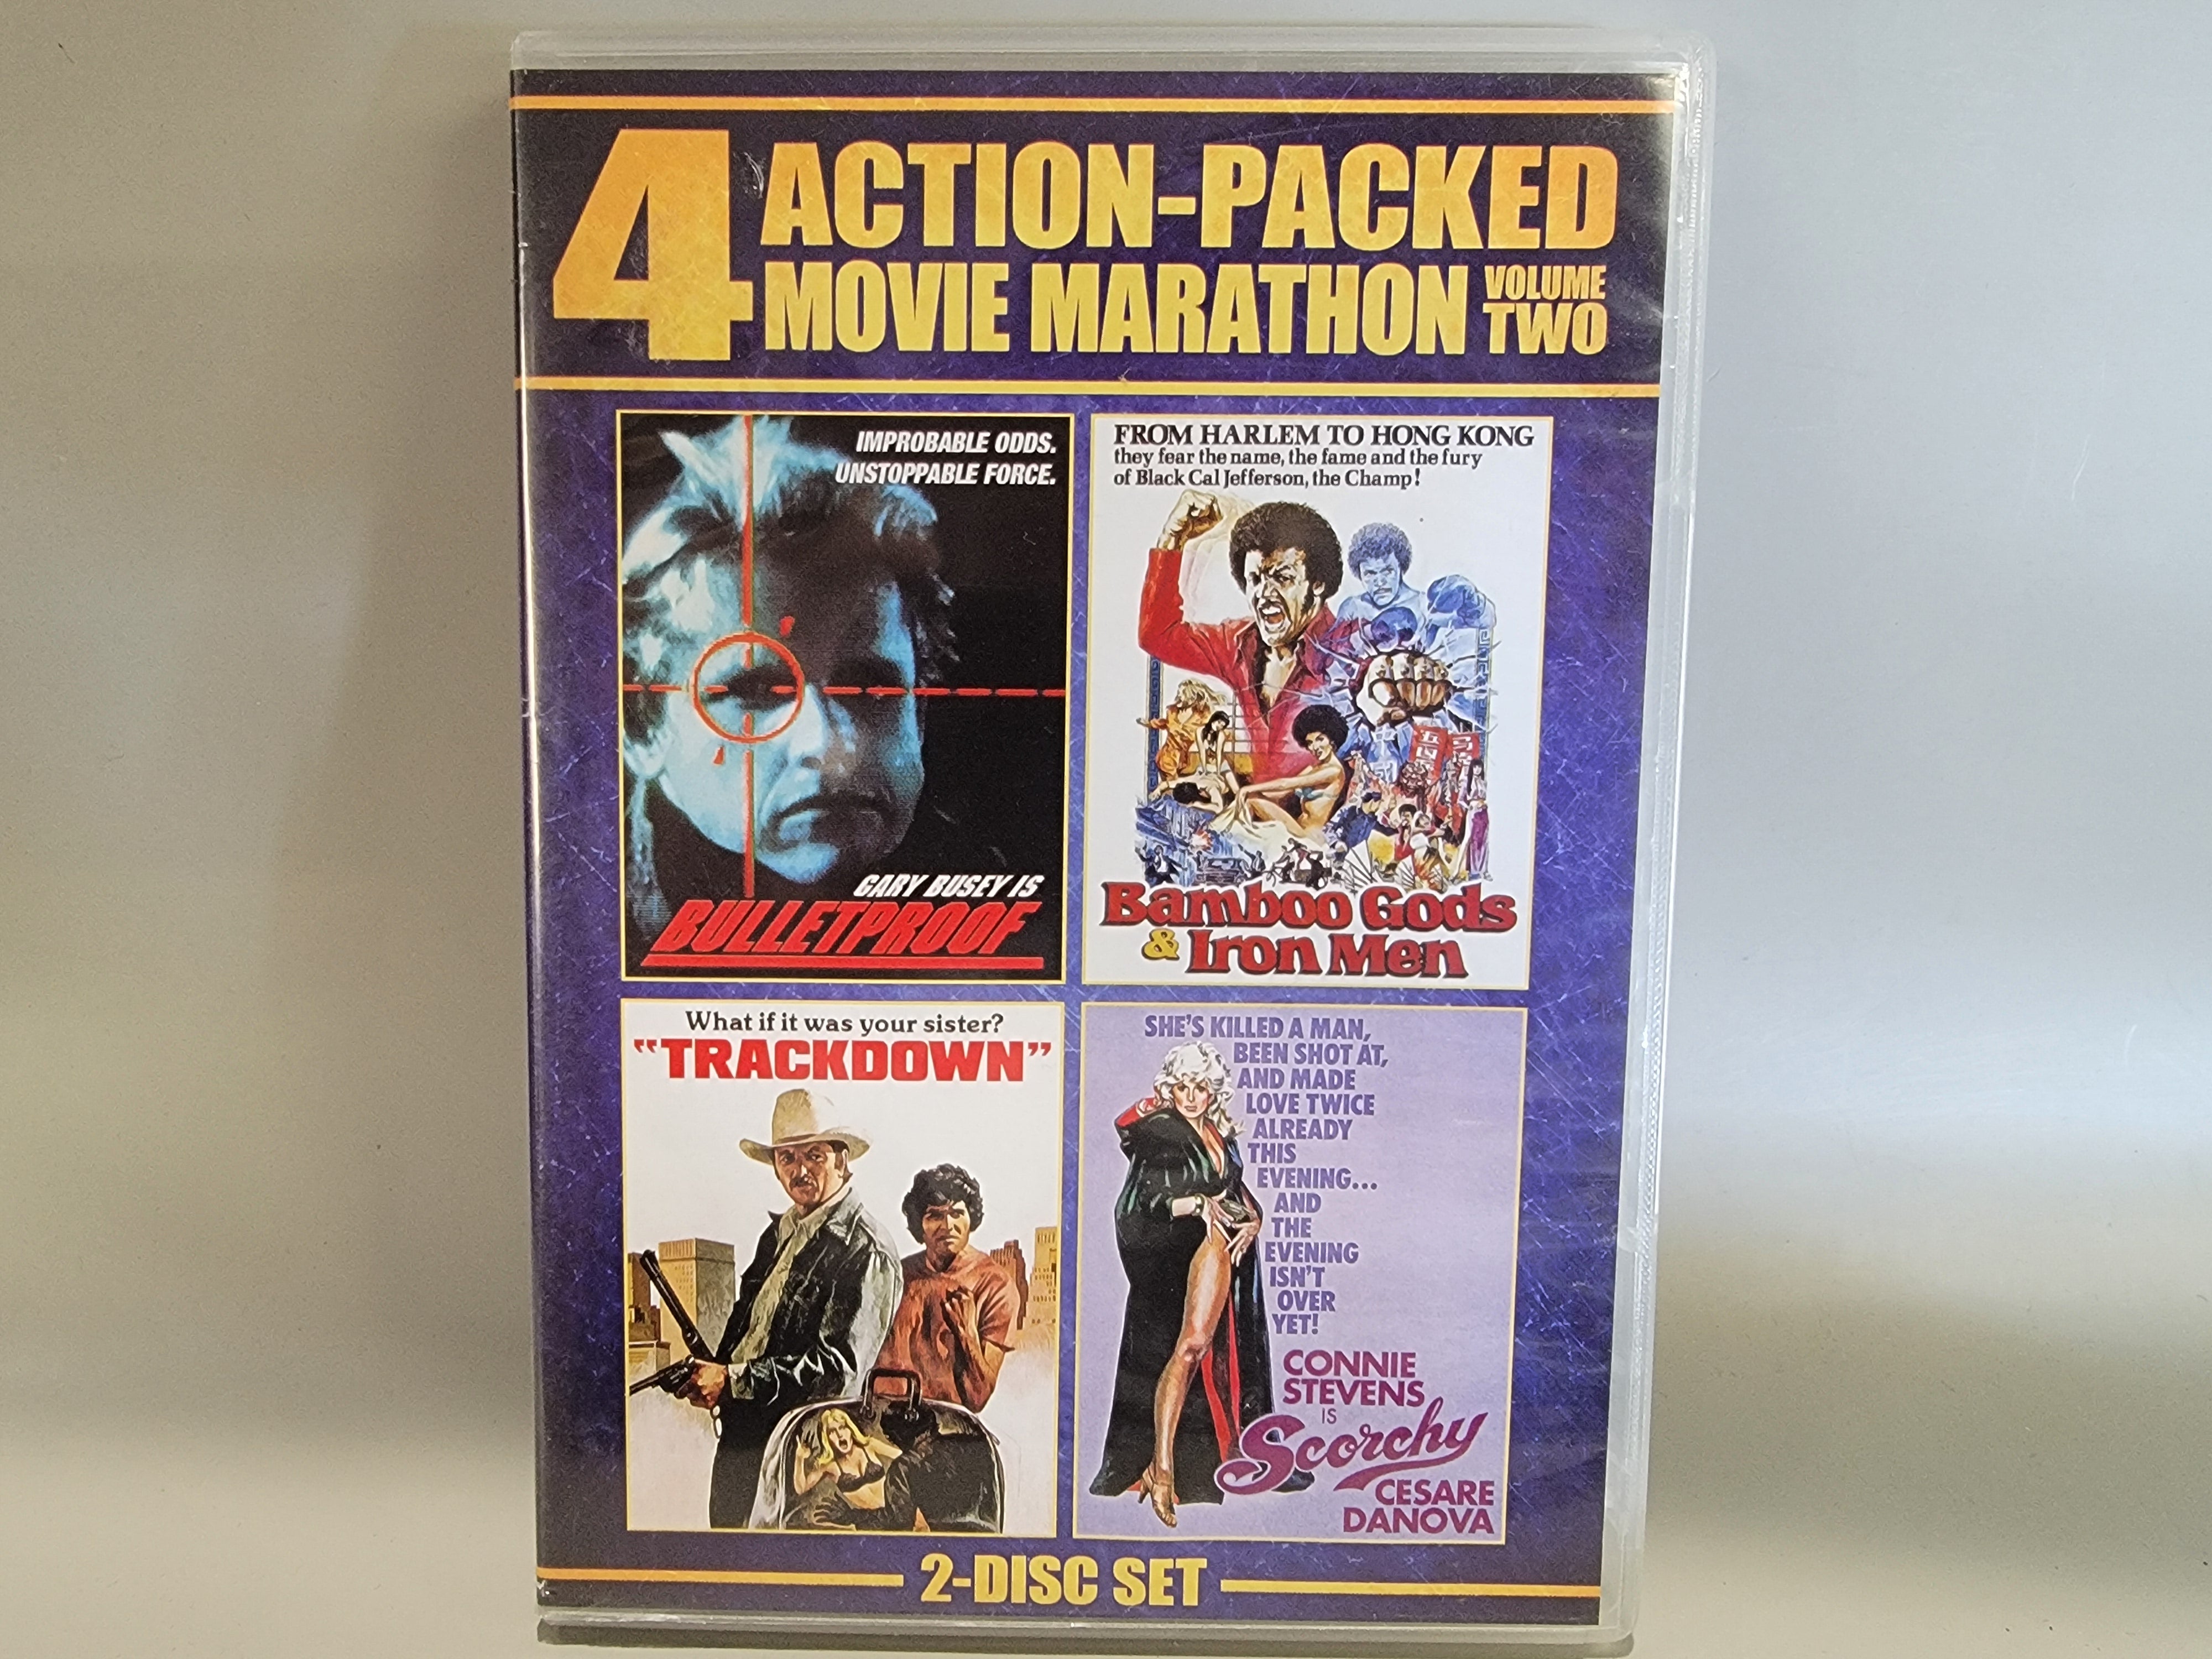 4 ACTION-PACKED MOVIE MARATHON VOLUME TWO DVD [USED]